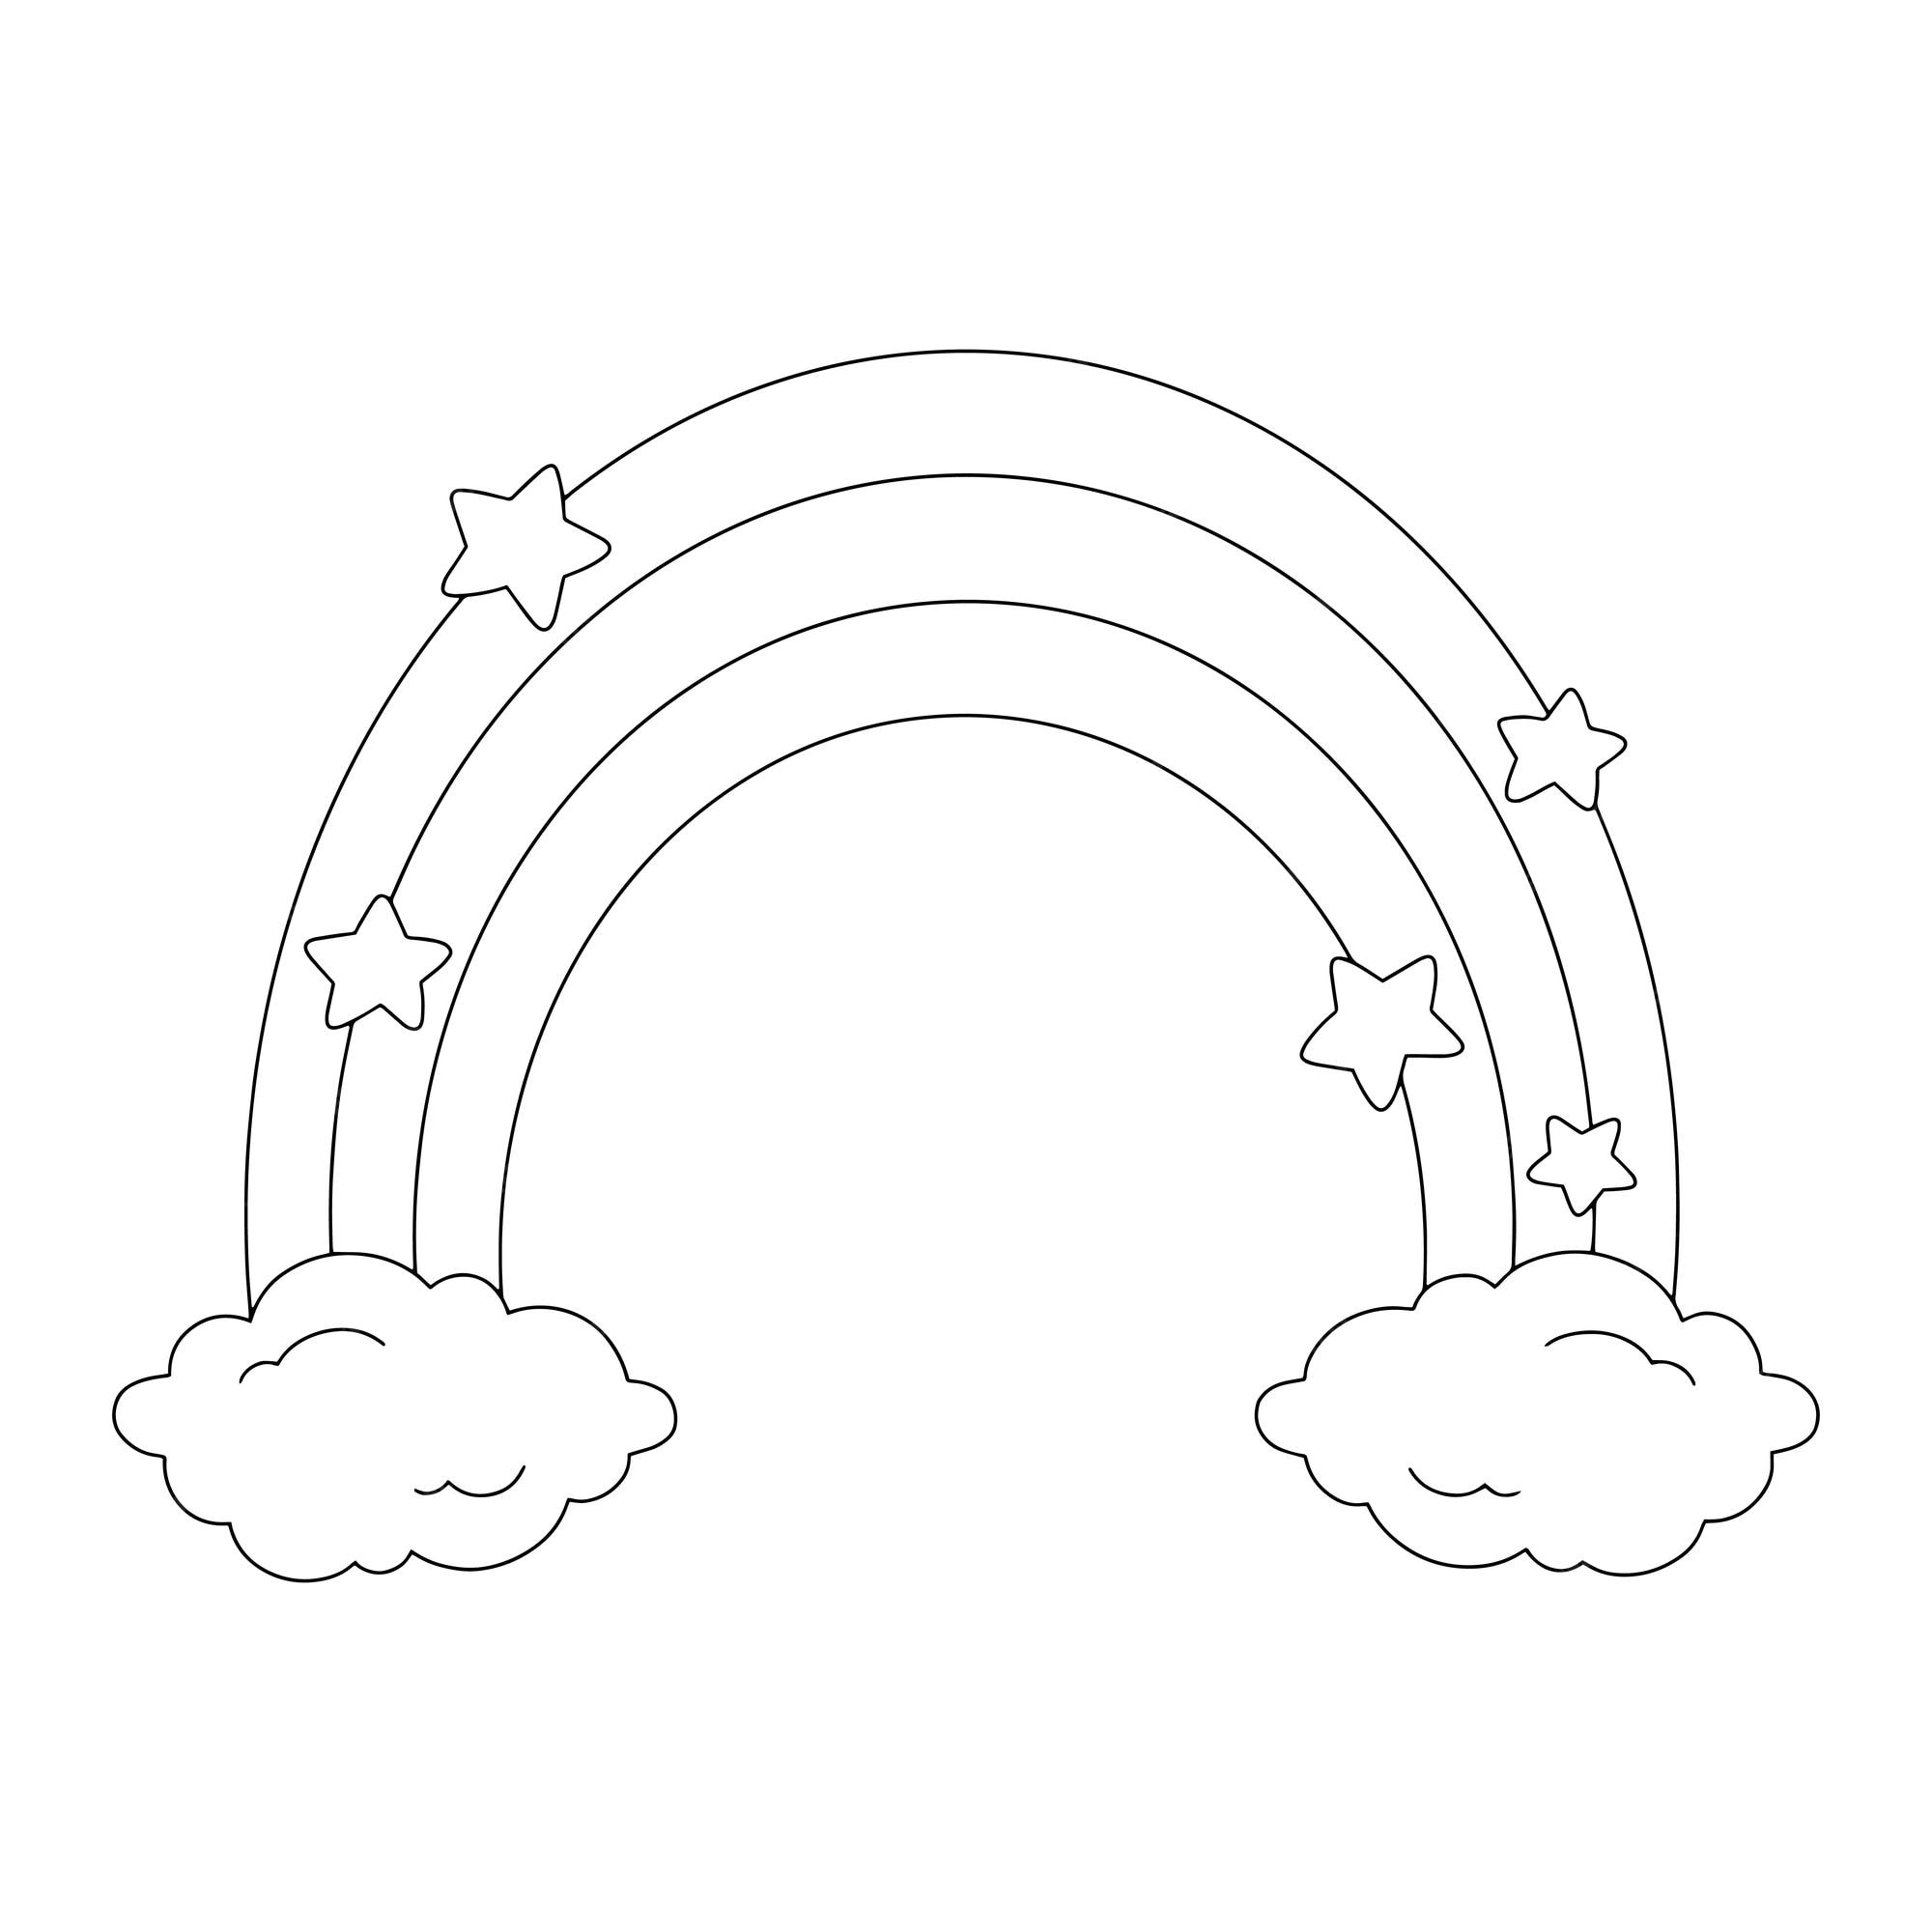 Premium vector rainbows and clouds coloring book page for kids